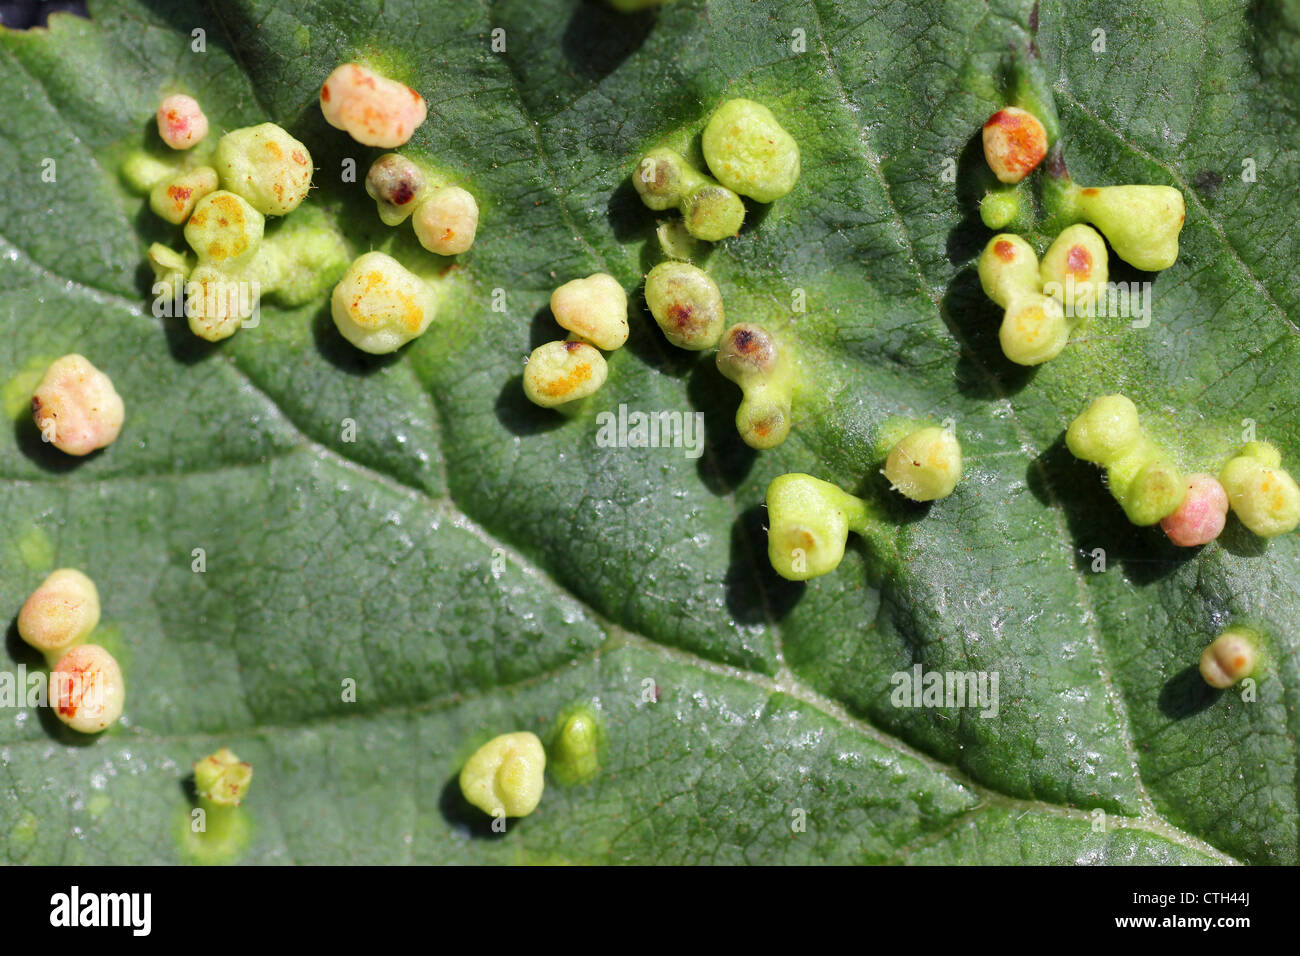 Blister Galls On Common Alder Alnus glutinosa leaf caused by the Mite Eriophyes laevis Stock Photo